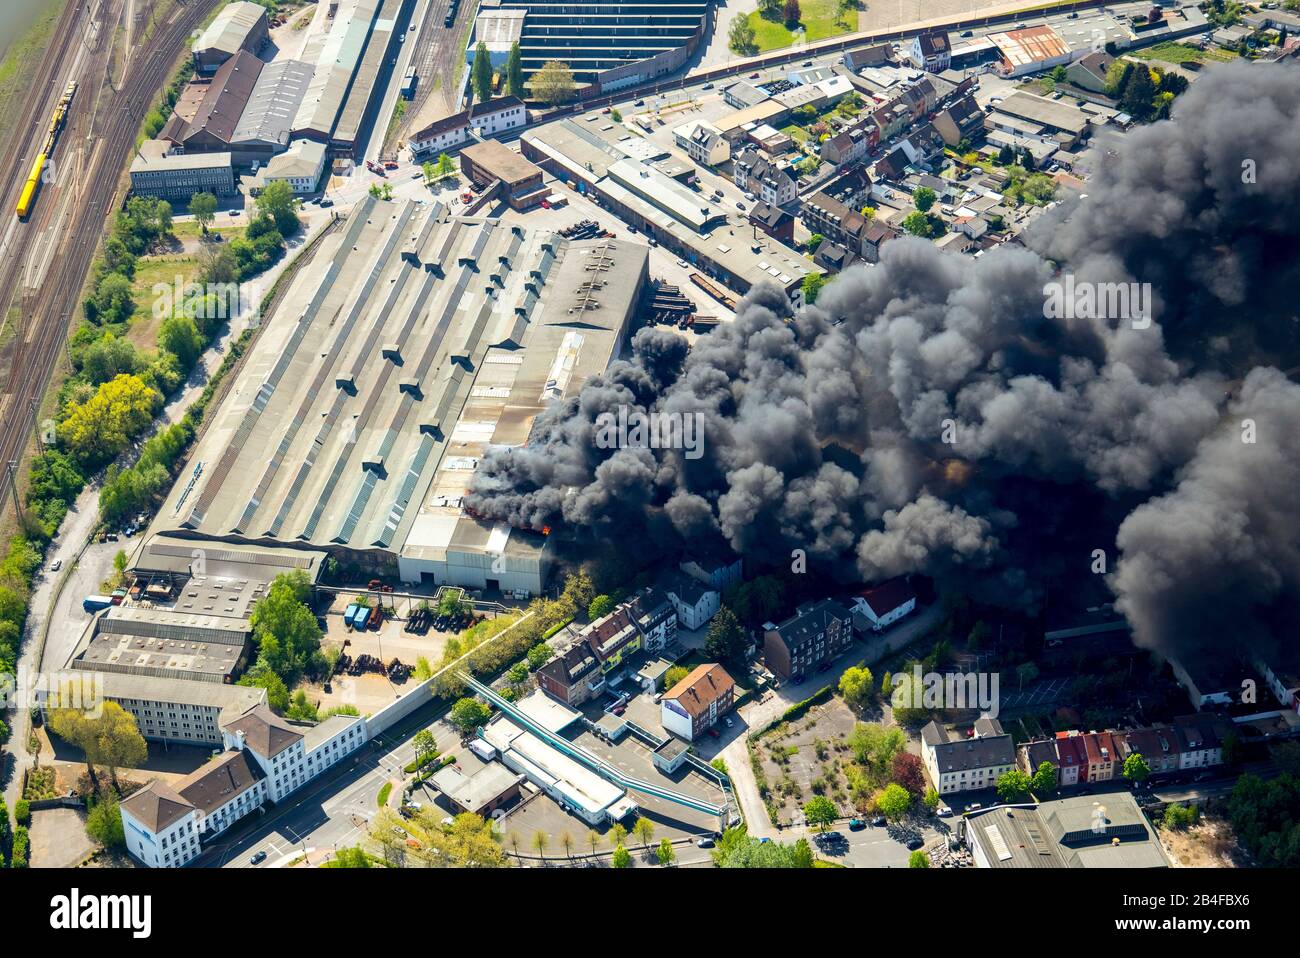 Aerial view of the fire at WDI in Hamm on Wilhelmstrasse. At Wilhelmstrasse, a WDI hall has been burning since about 12 o'clock. Since 2:25 pm, houses have been evacuated in the immediate vicinity. There are three injured. Wilhelmstrasse is closed between Otto-Brenner-Strasse and Schwarzer Weg. Stock Photo